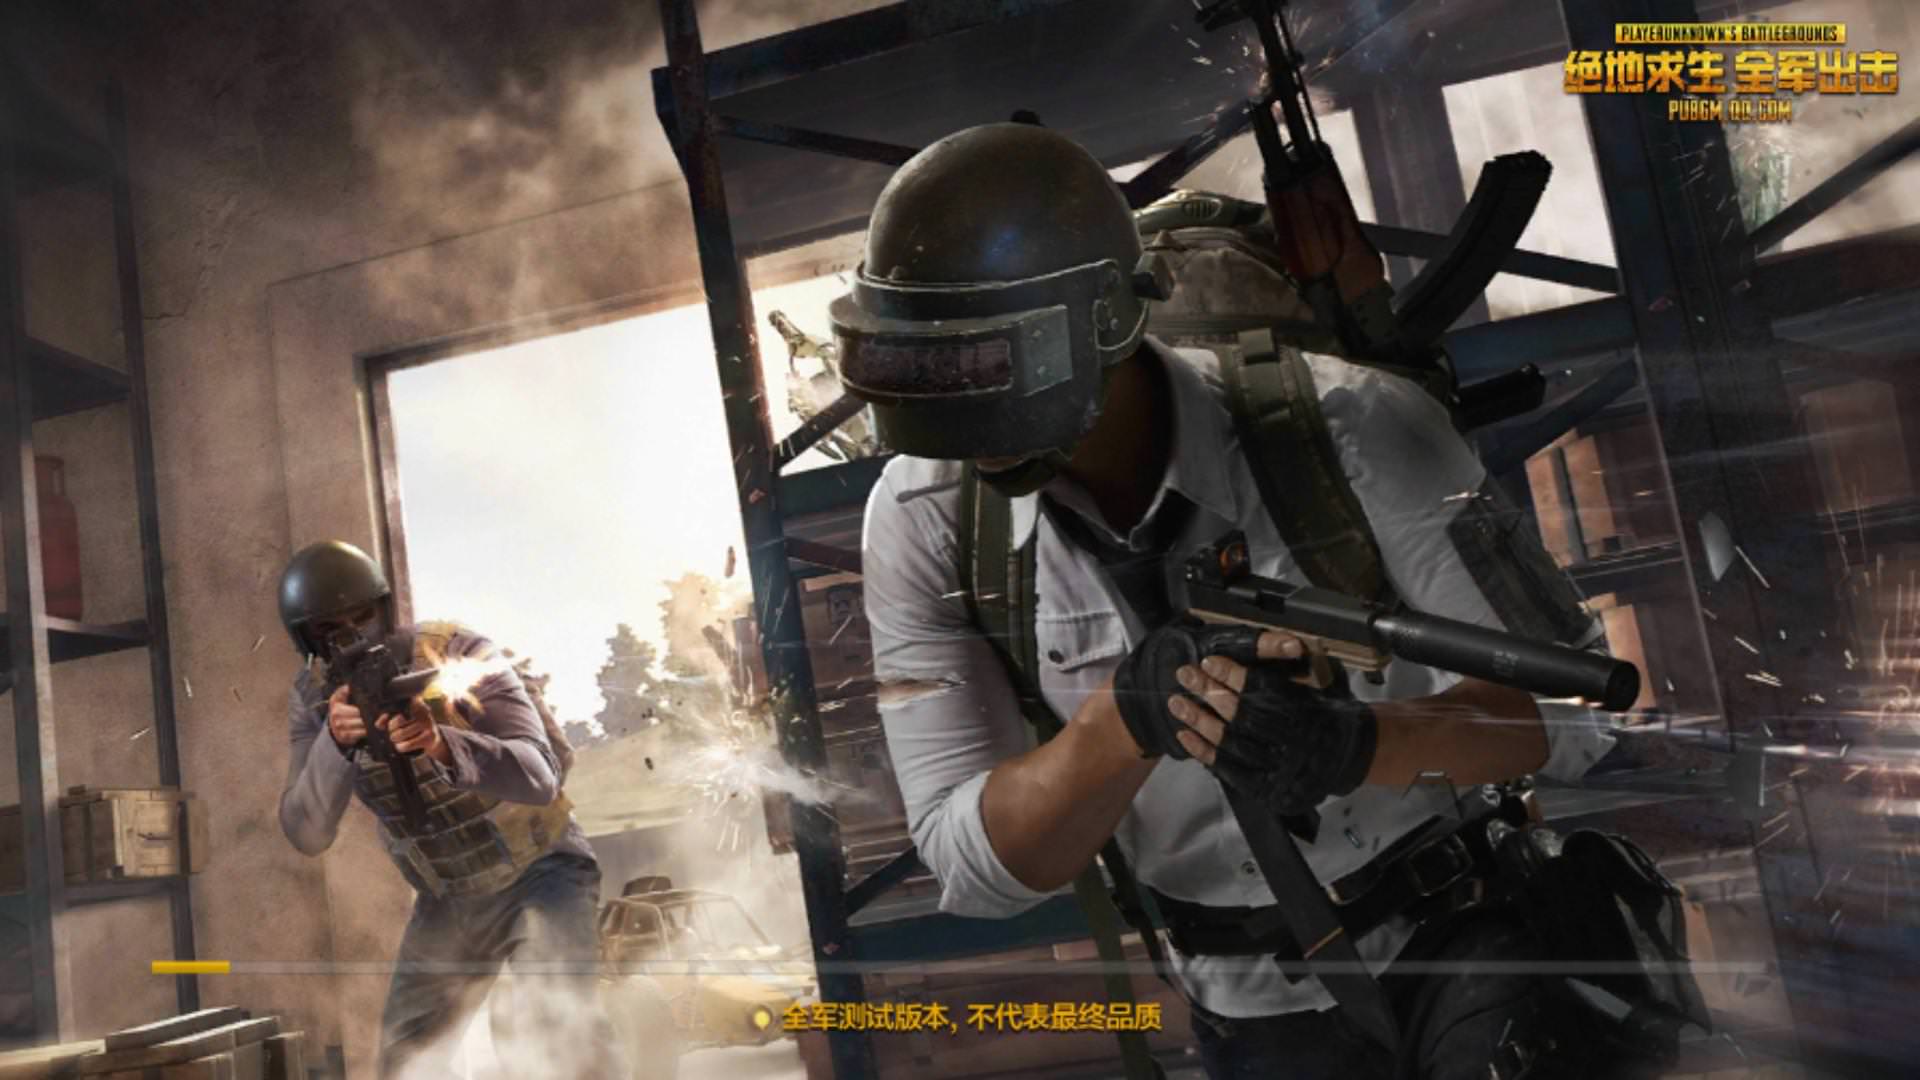 Some of the cool loading screens from the different PUBG